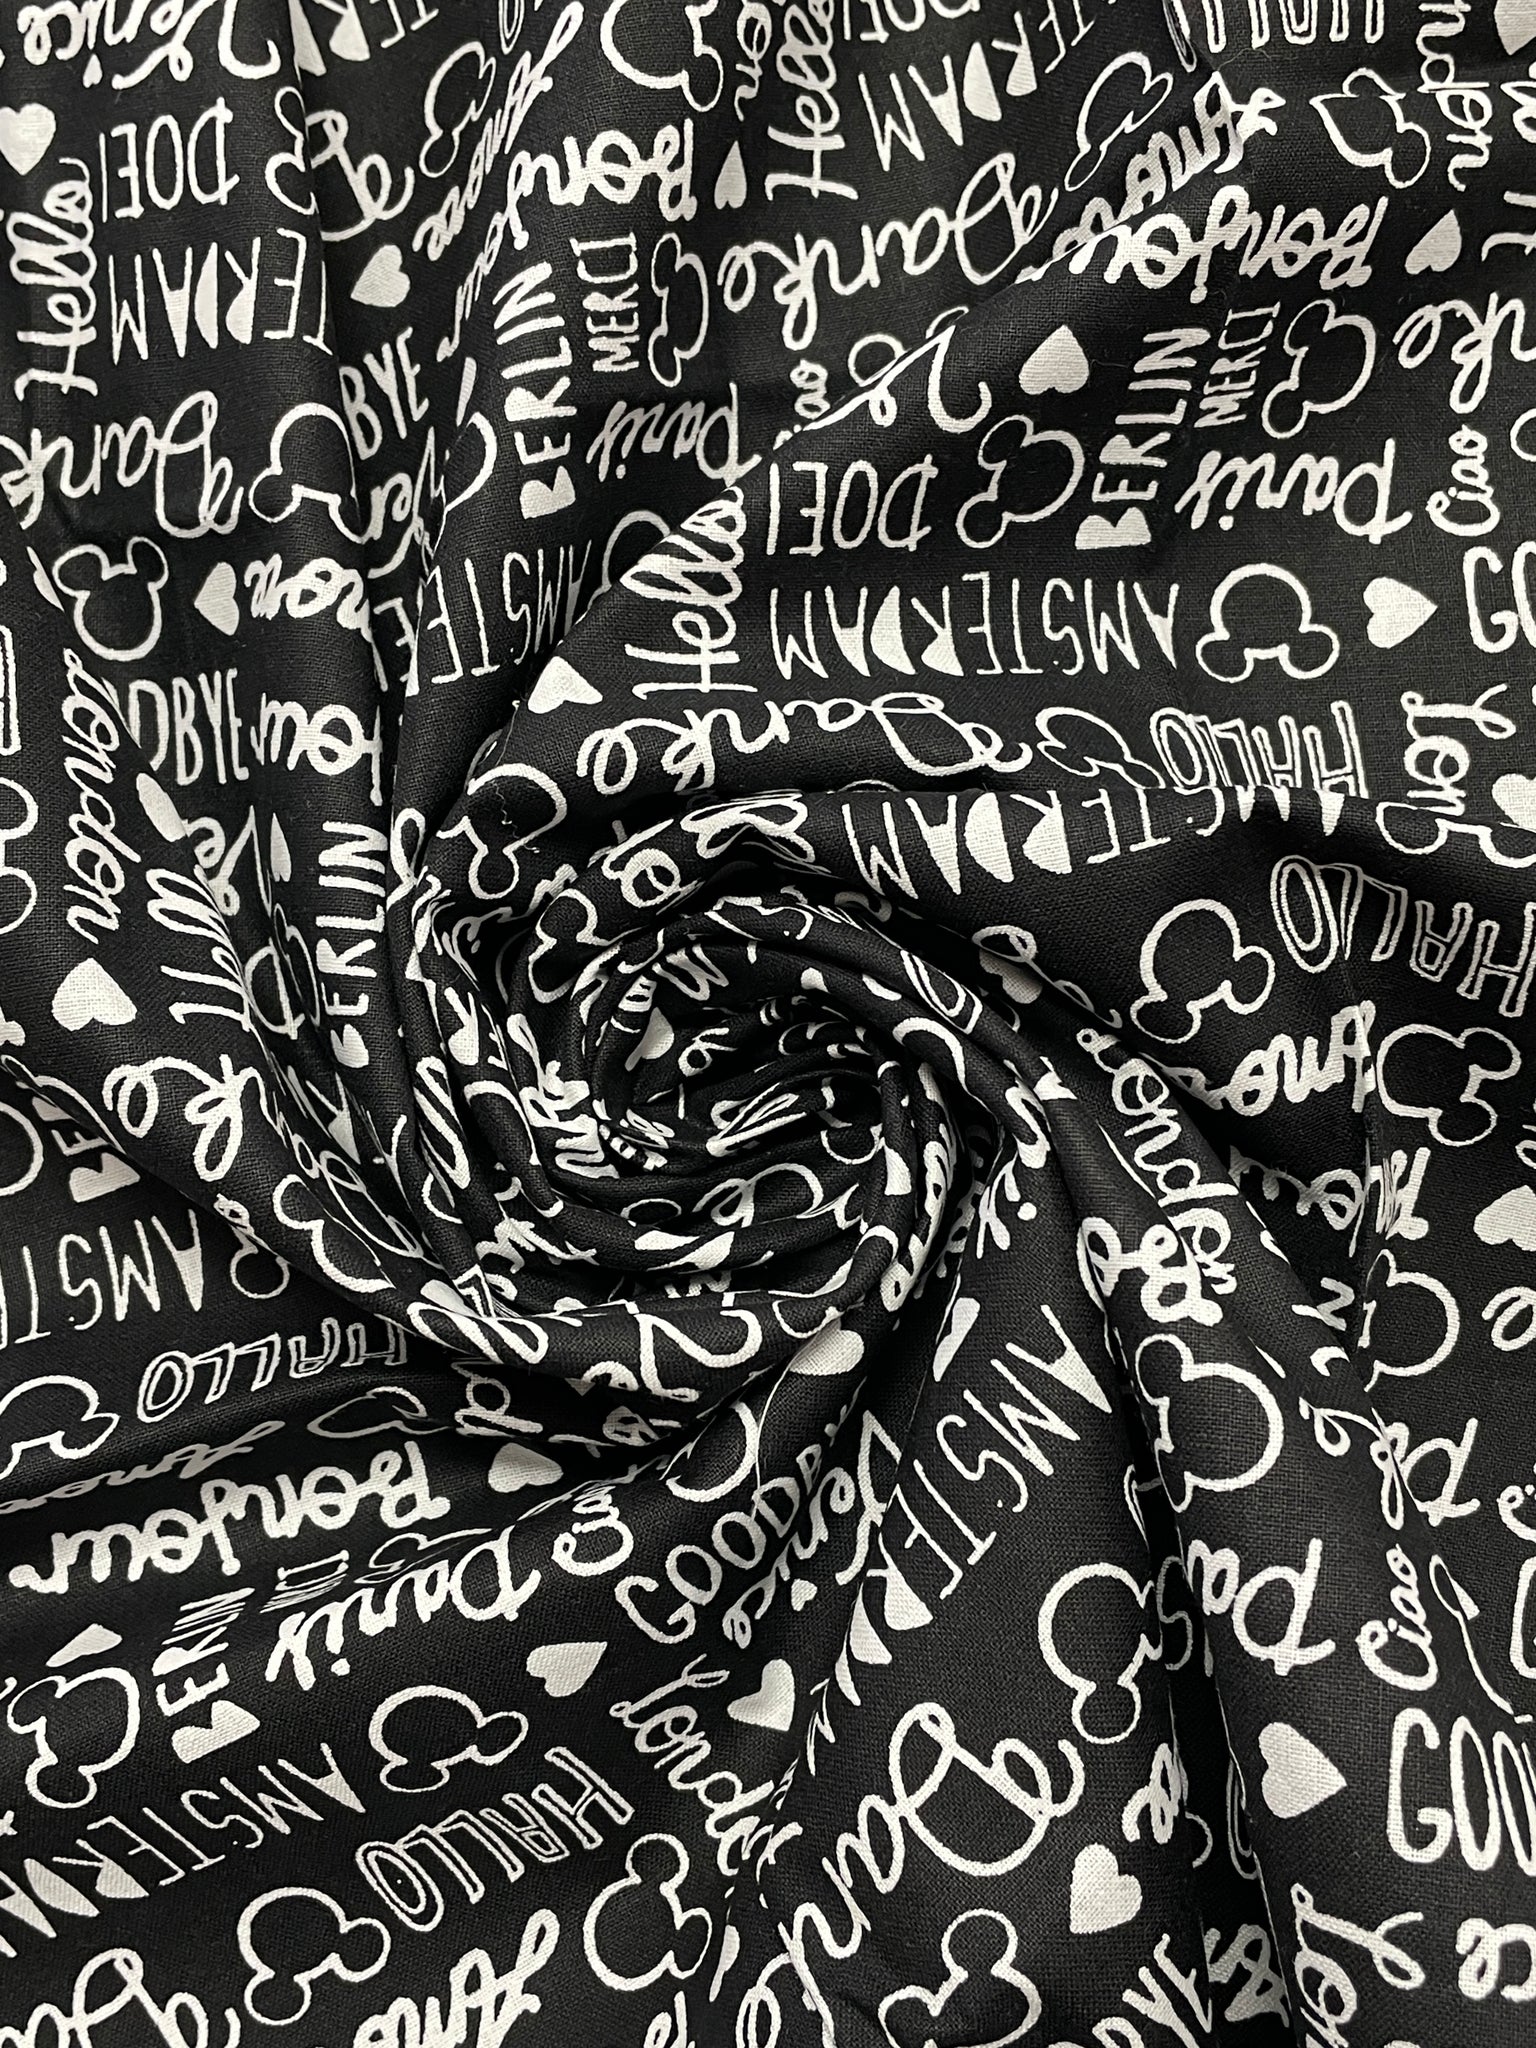 3/4 YD Quilting Cotton Remnant - Black with White Disney Writing